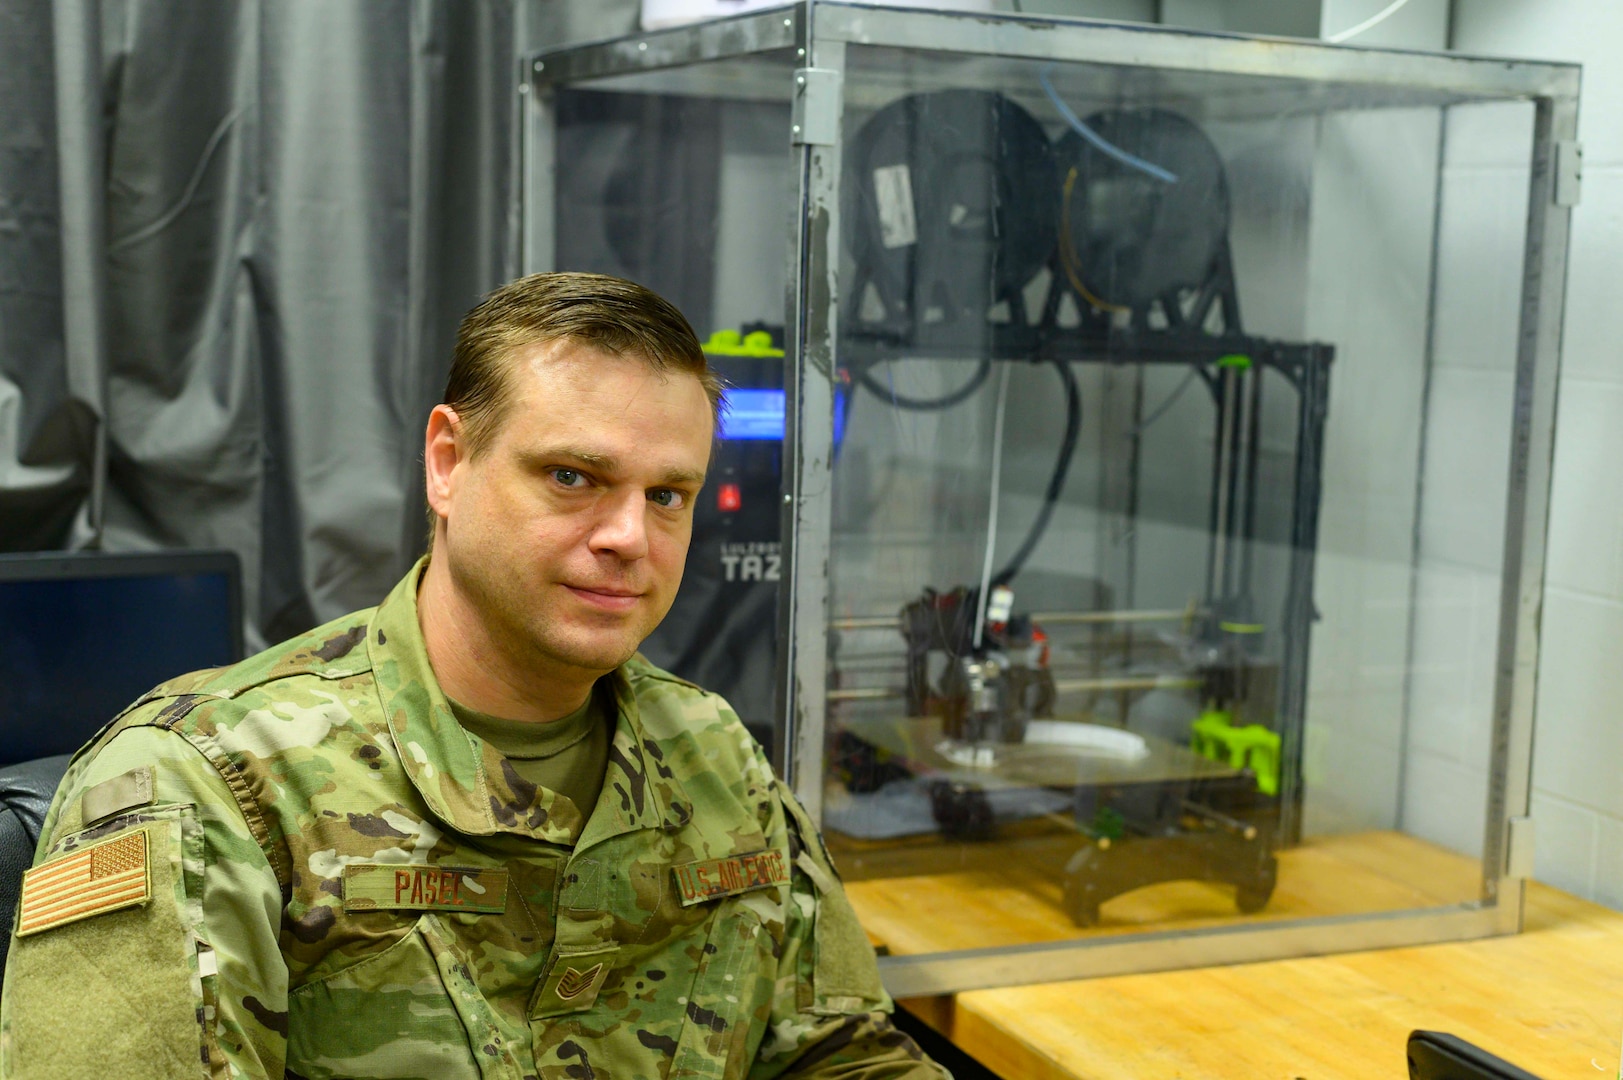 Tech. Sgt. Alan Pasel, an aircraft metals technology specialist assigned to the 130th Maintenance Squadron, with a LulzBot TAZ 6 Dual Platinum 3D printer at McLaughlin Air National Guard Base, Charleston, W.Va., March 27, 2020. Pasel used the printer to design a face shield prototype for production to fulfill a statewide shortage caused by the COVID-19 outbreak.